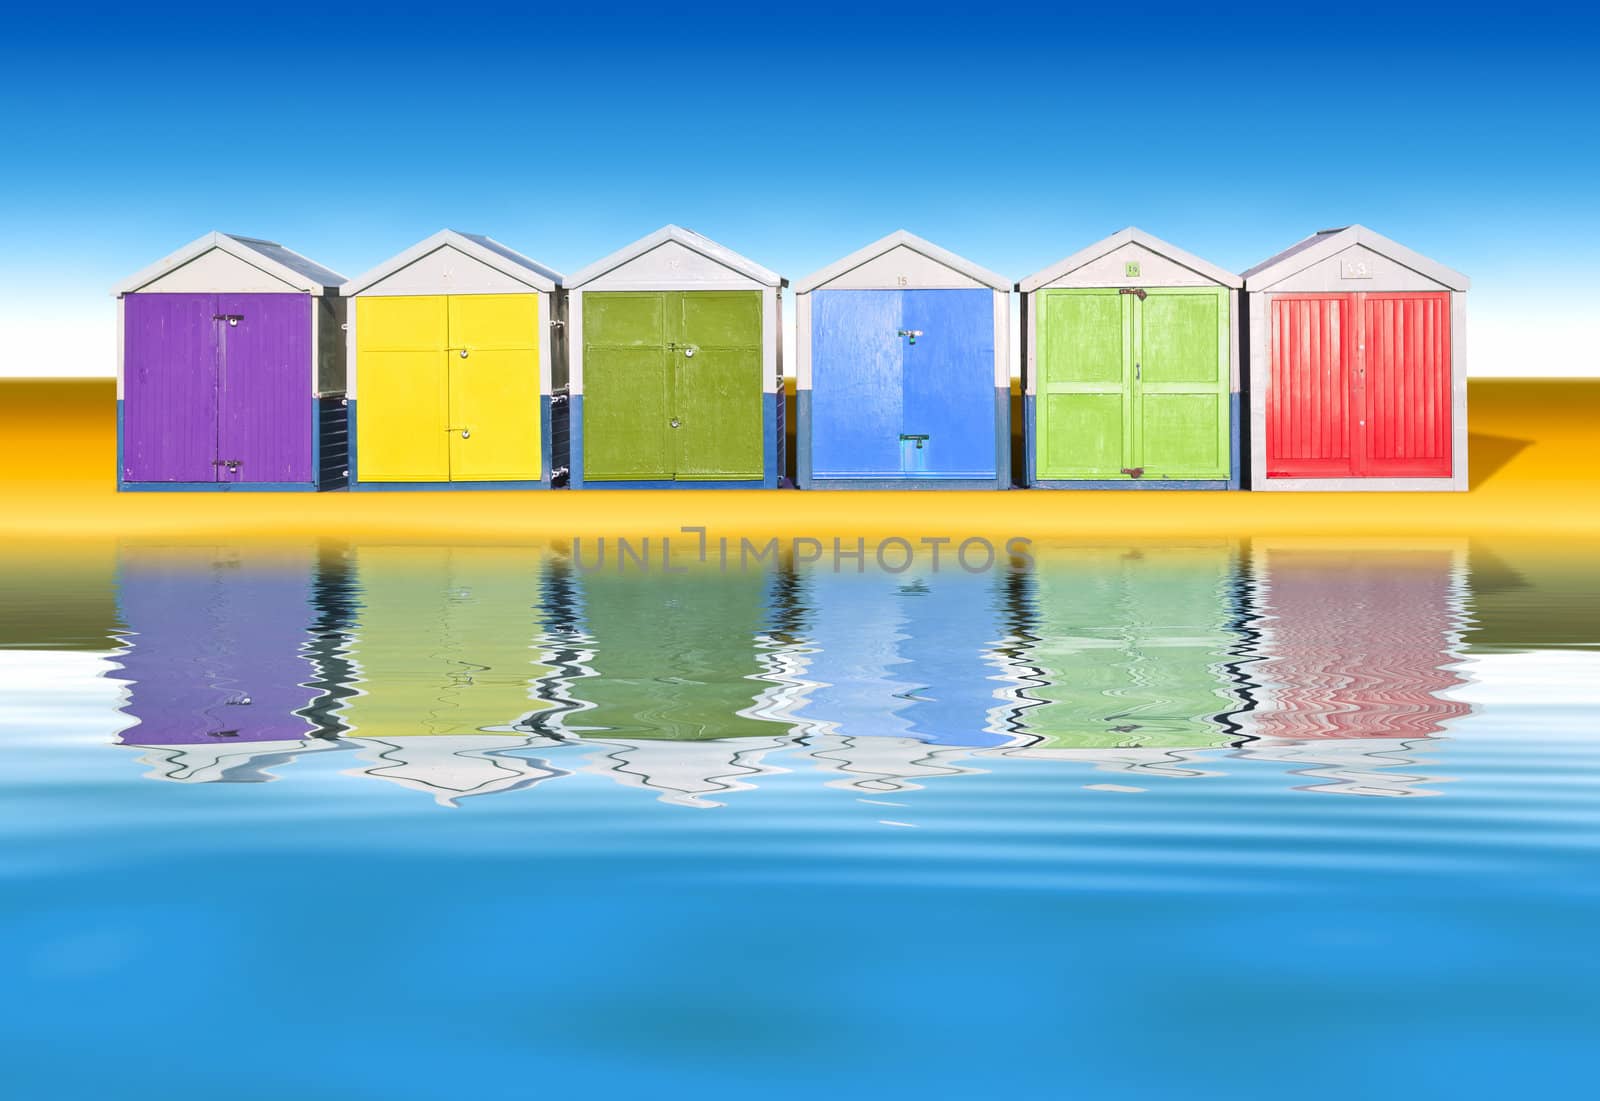 An image of colorful little beach huts